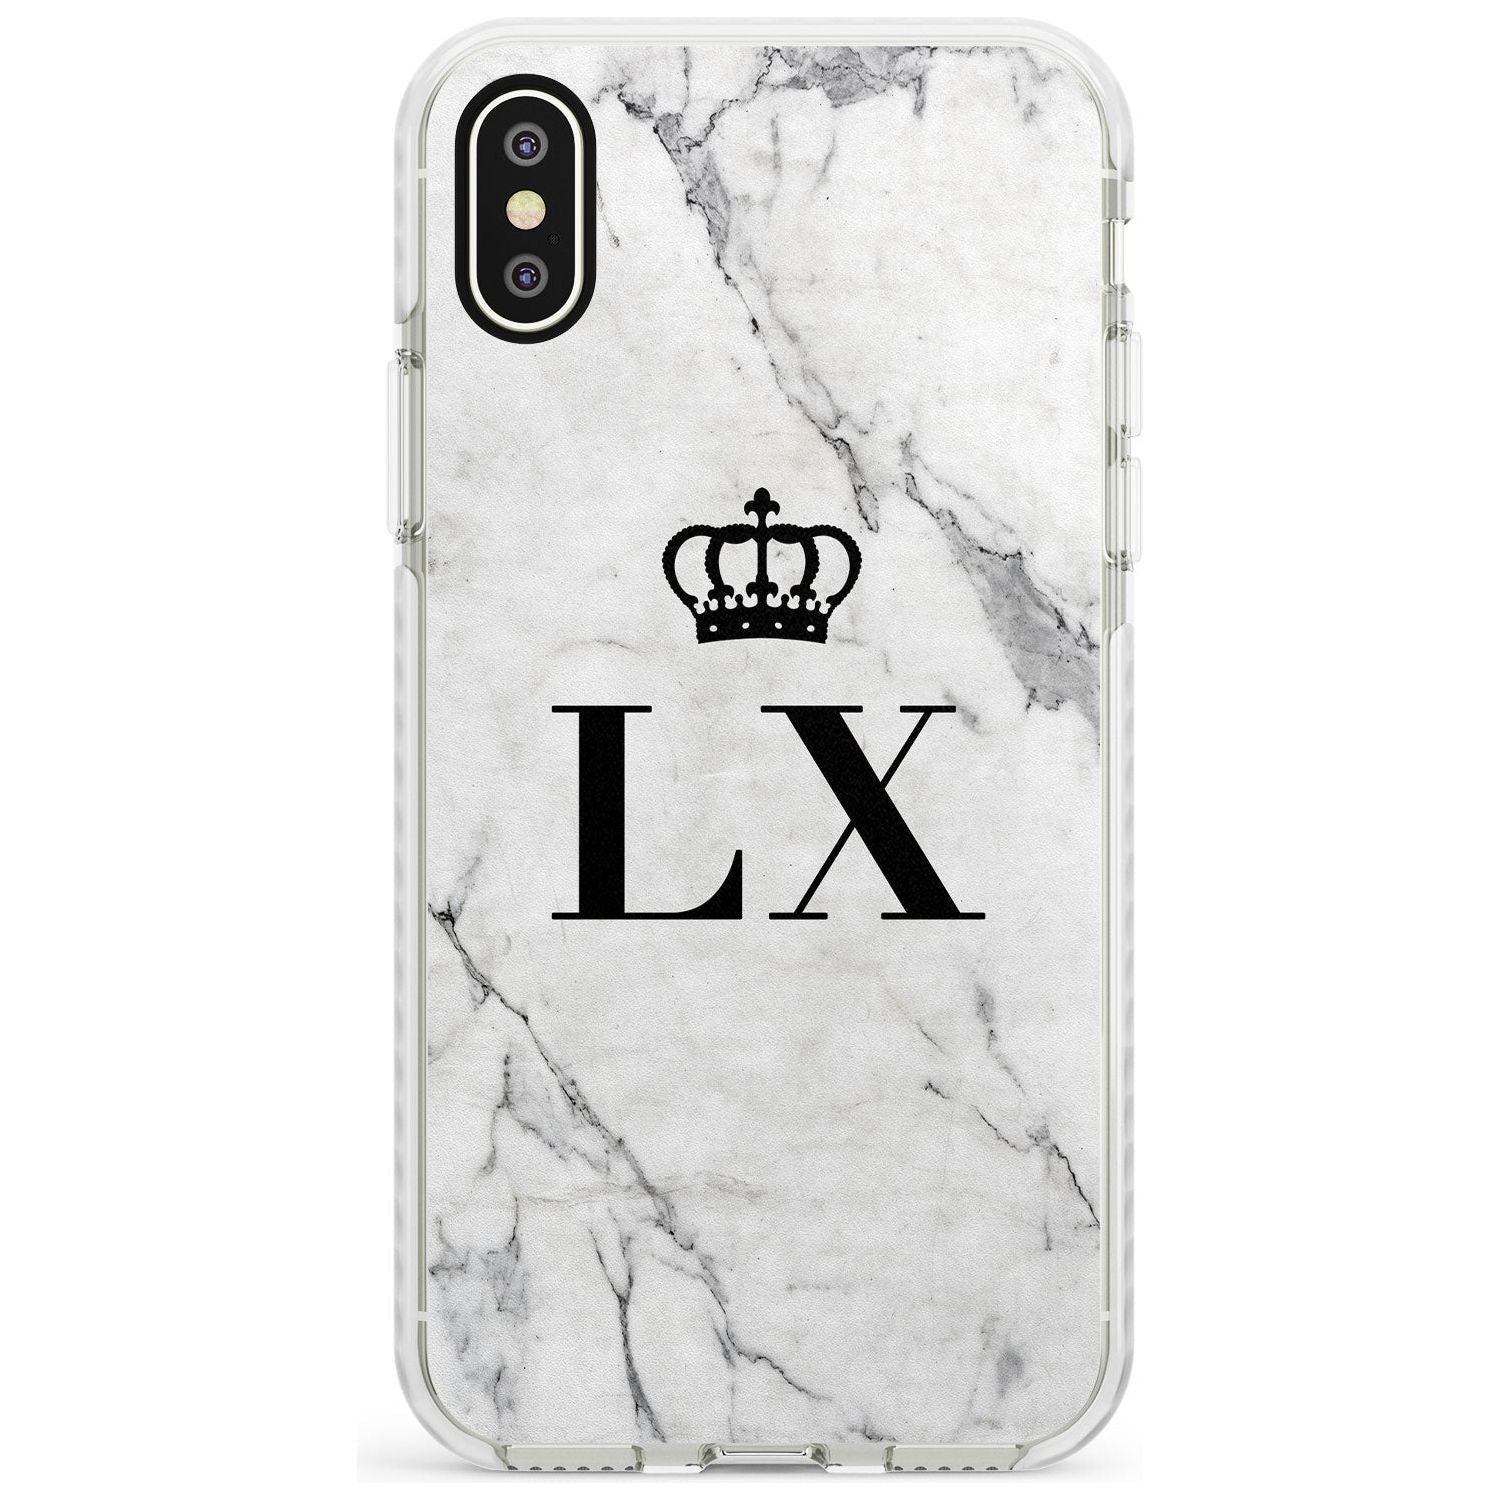 Personalised Initials with Crown on White Marble Impact Phone Case for iPhone X XS Max XR